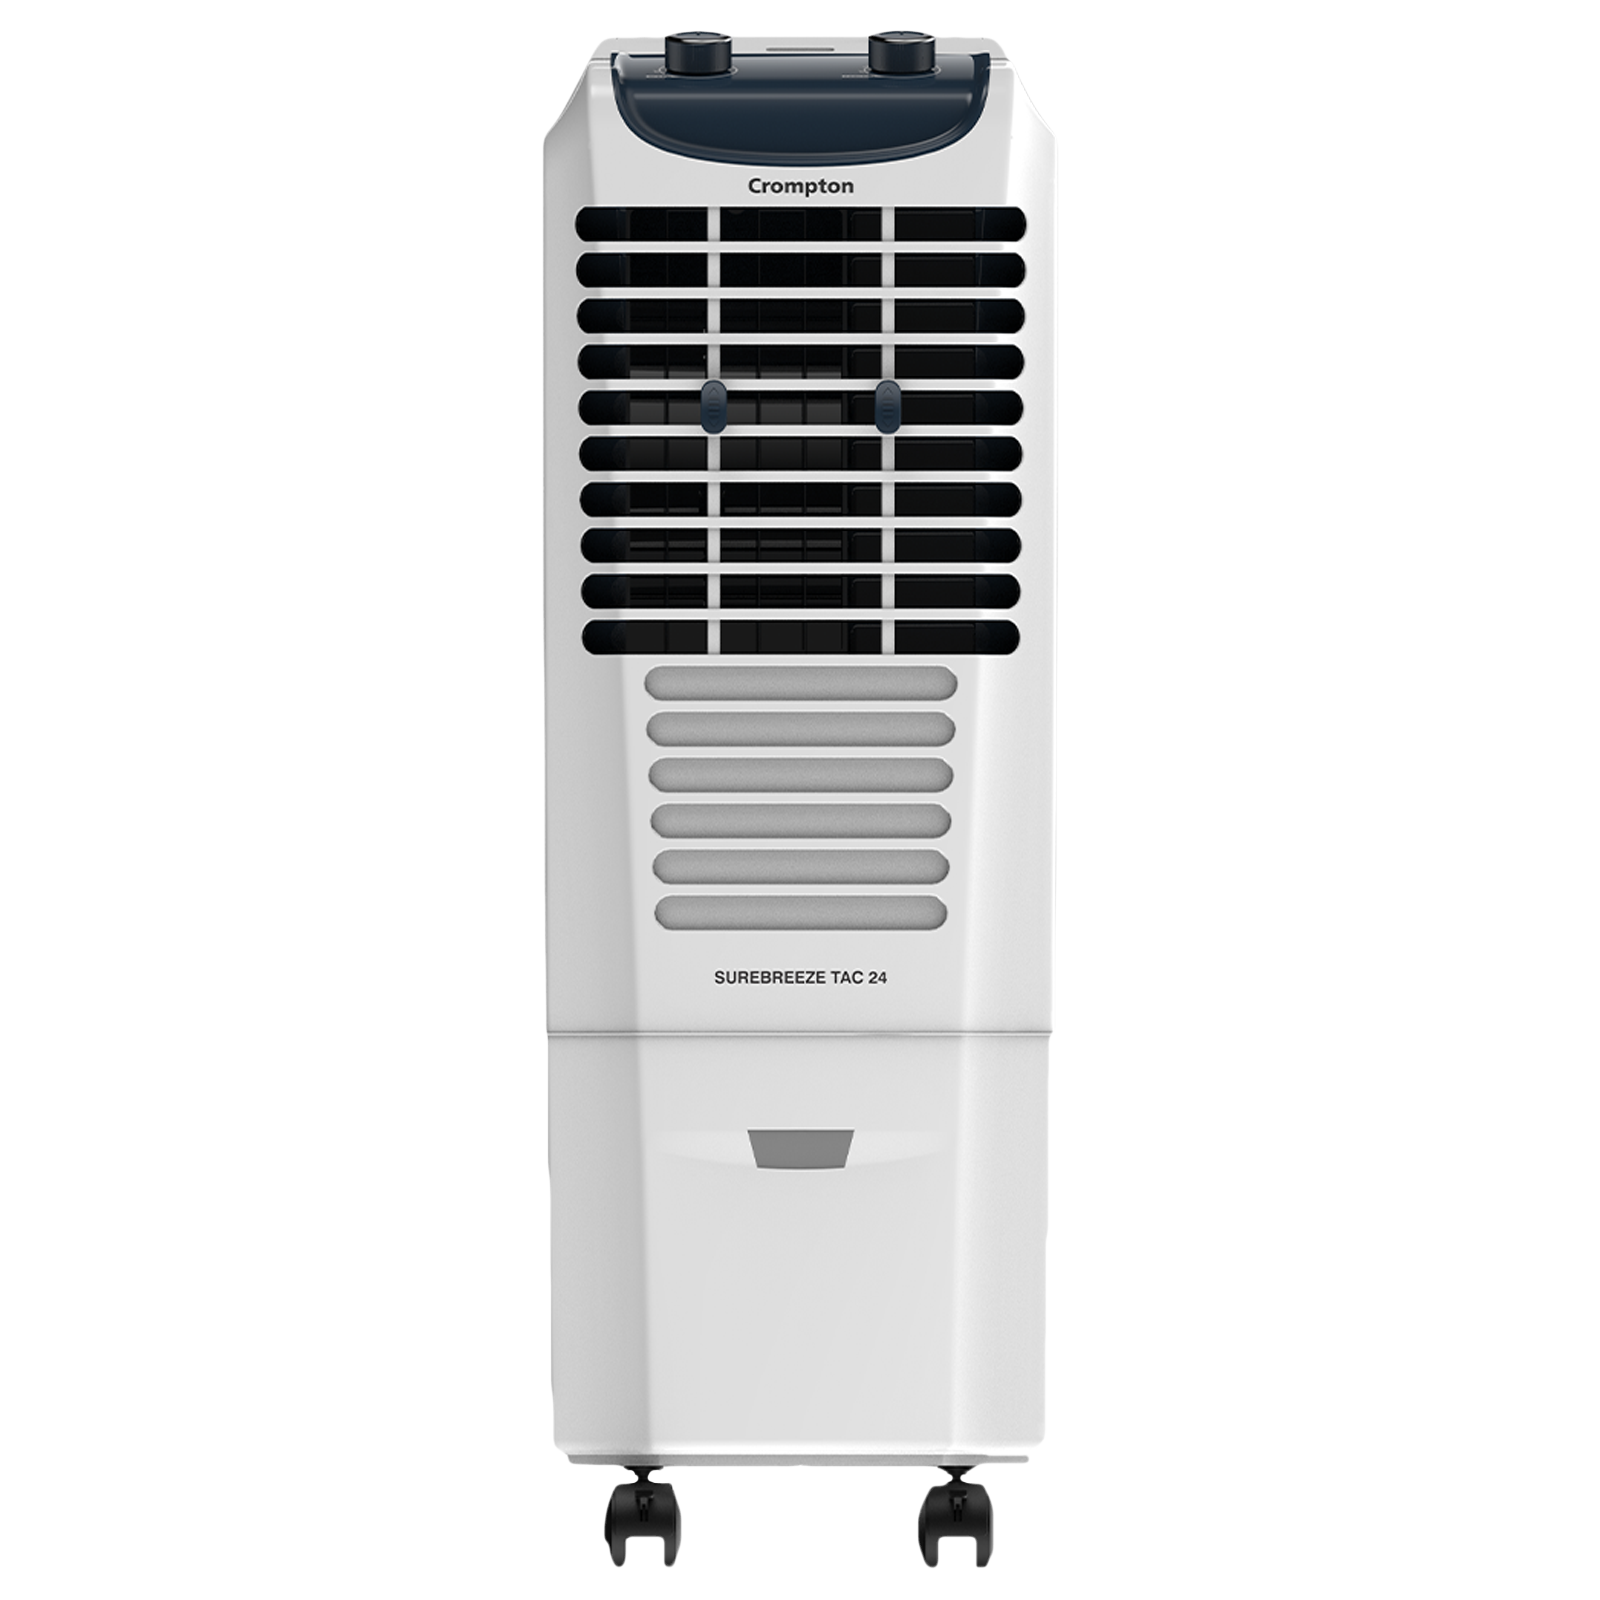 Crompton Surebreeze 24 Litres Tower Air Cooler with Overload Protection (4-Way Air Deflection, White & Black)